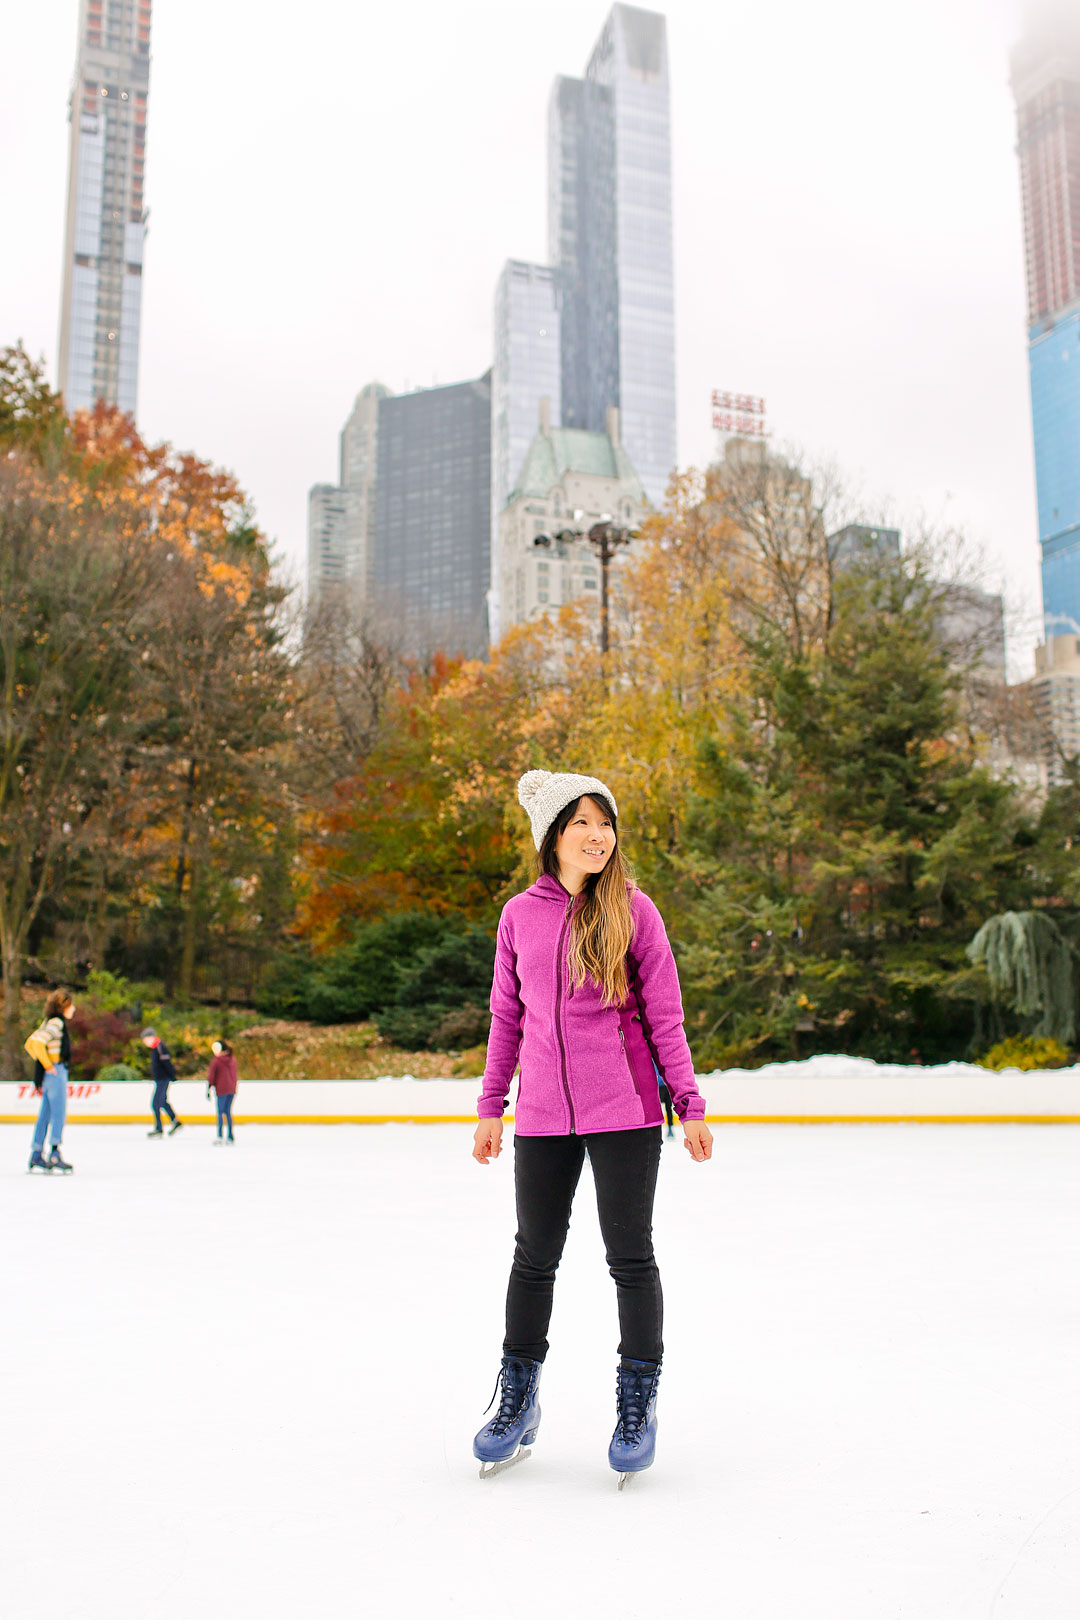 Wollman Rink Ice Skating Central Park